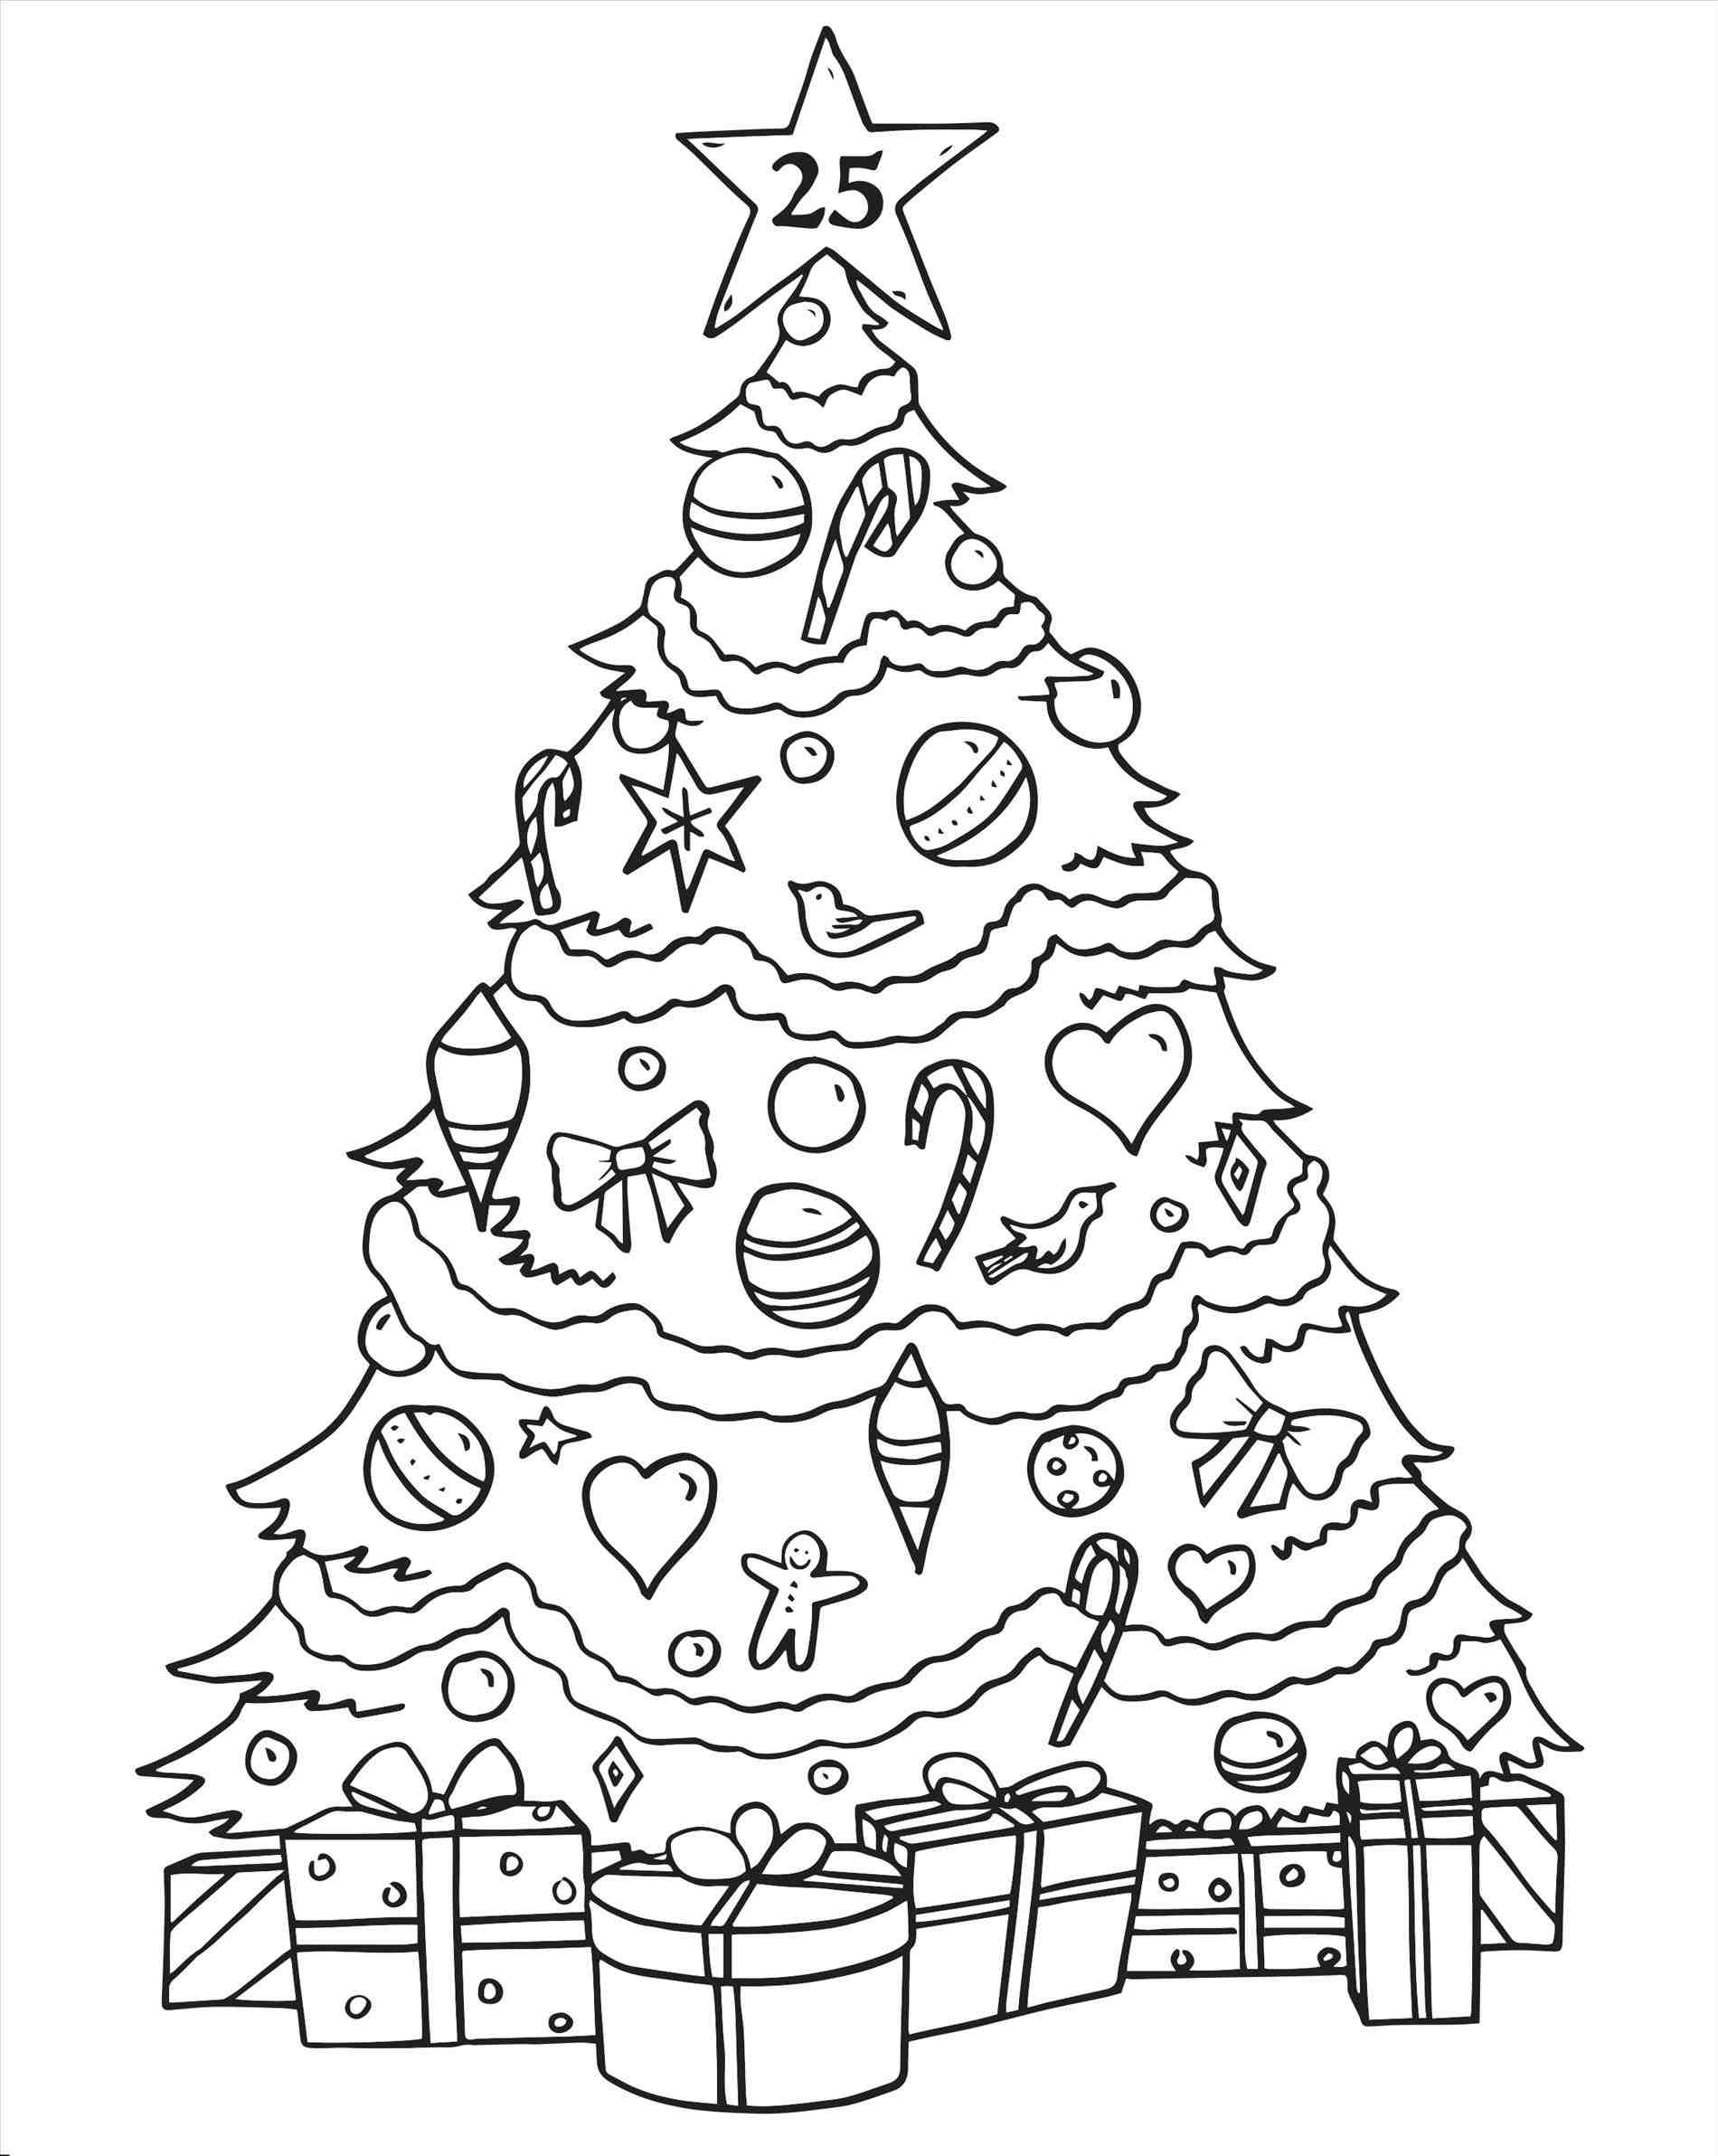 17+ Christmas Tree Coloring Pages For Kids Printable Background - COLORIST